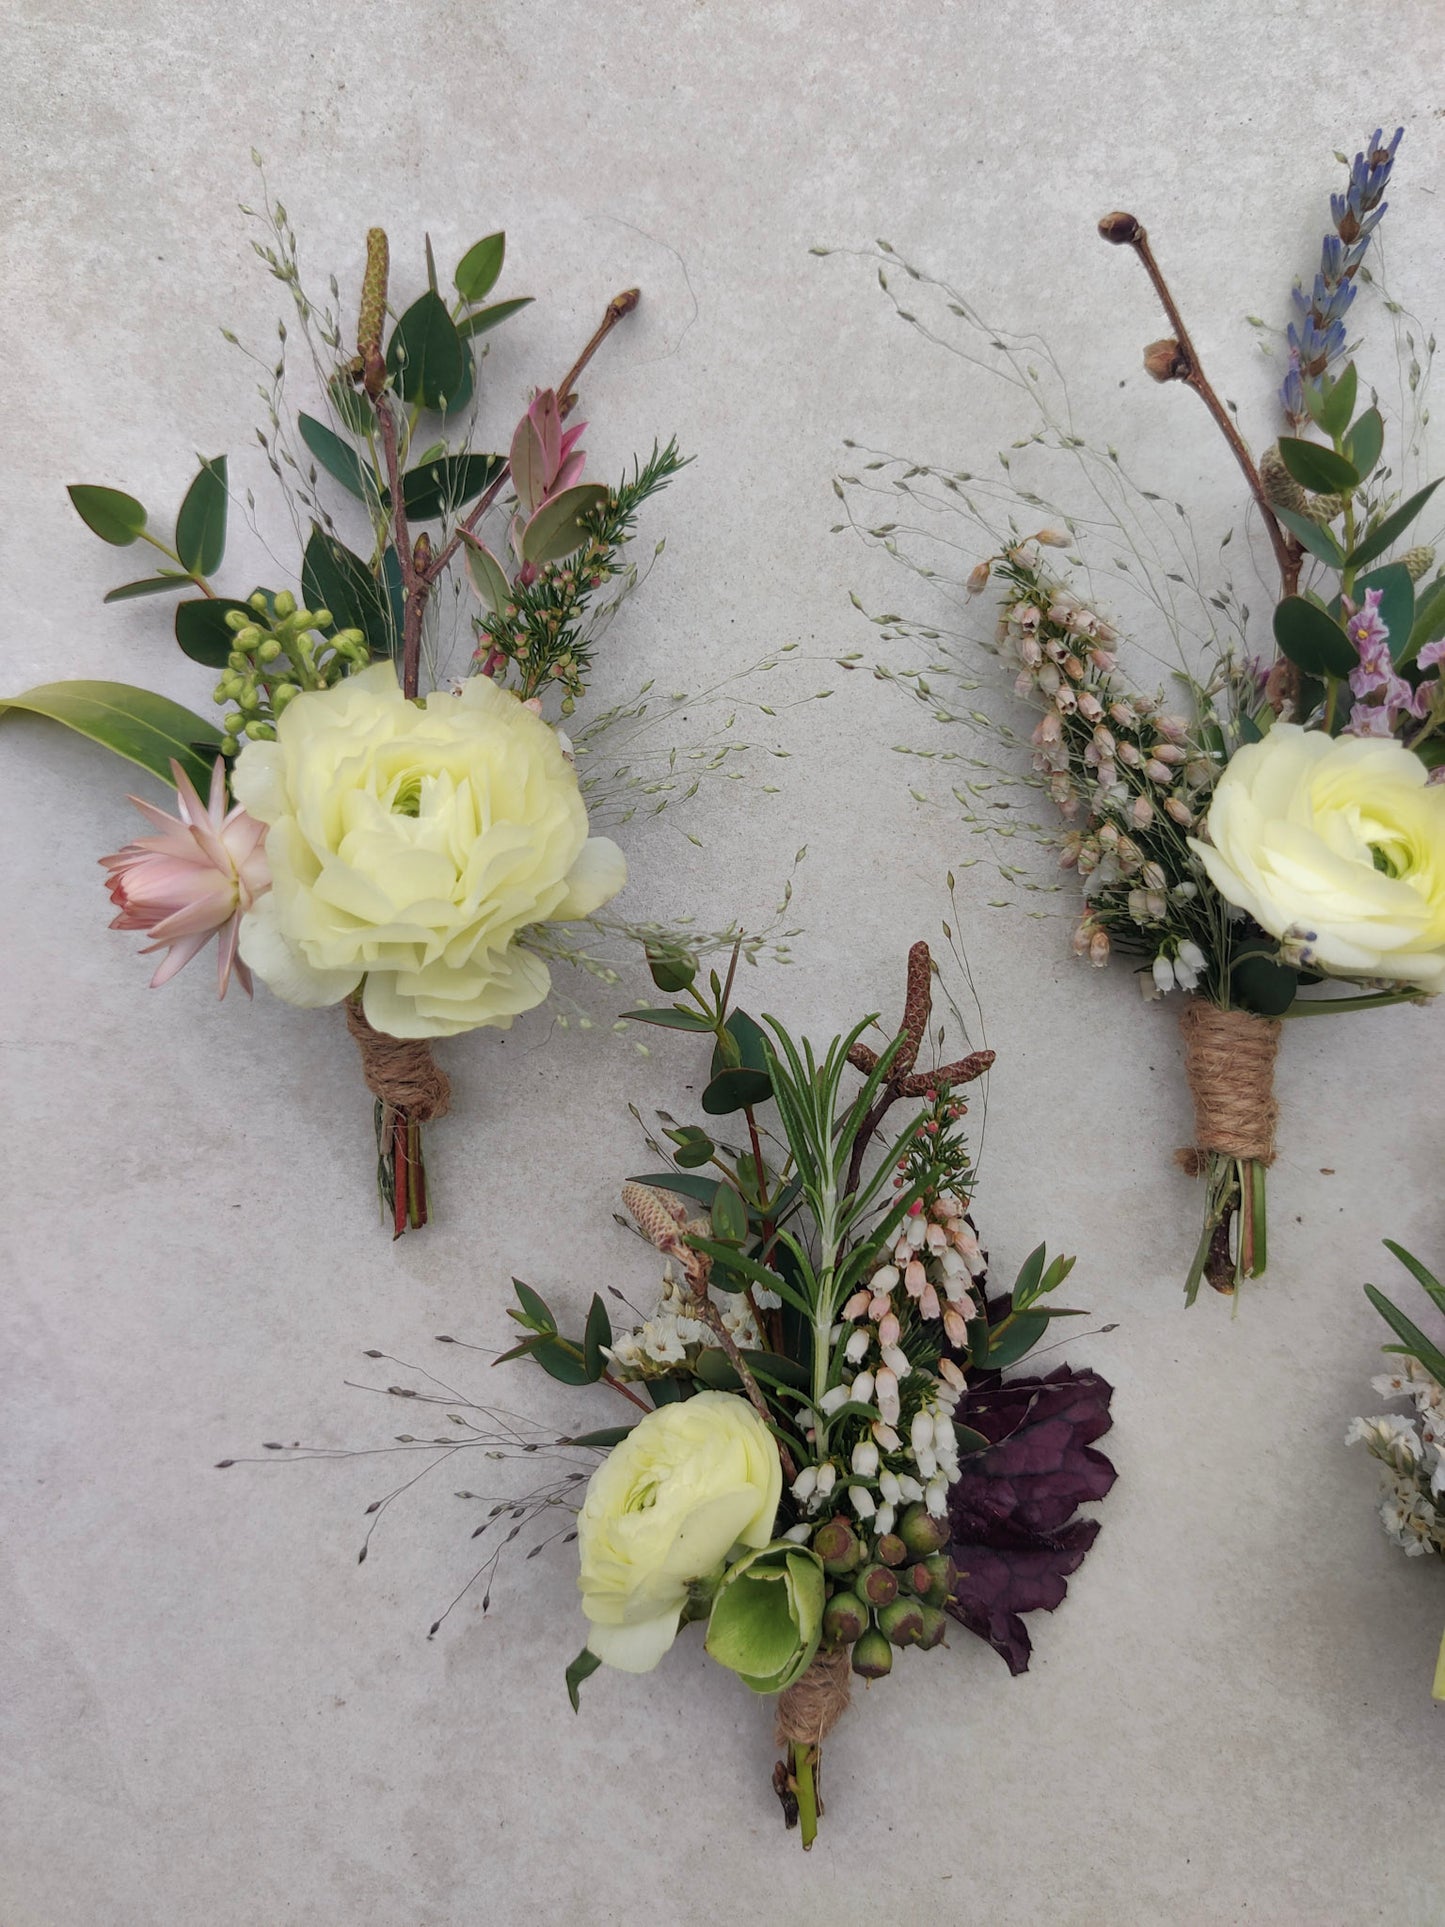 The 'Best in Bloom' Boutonniere